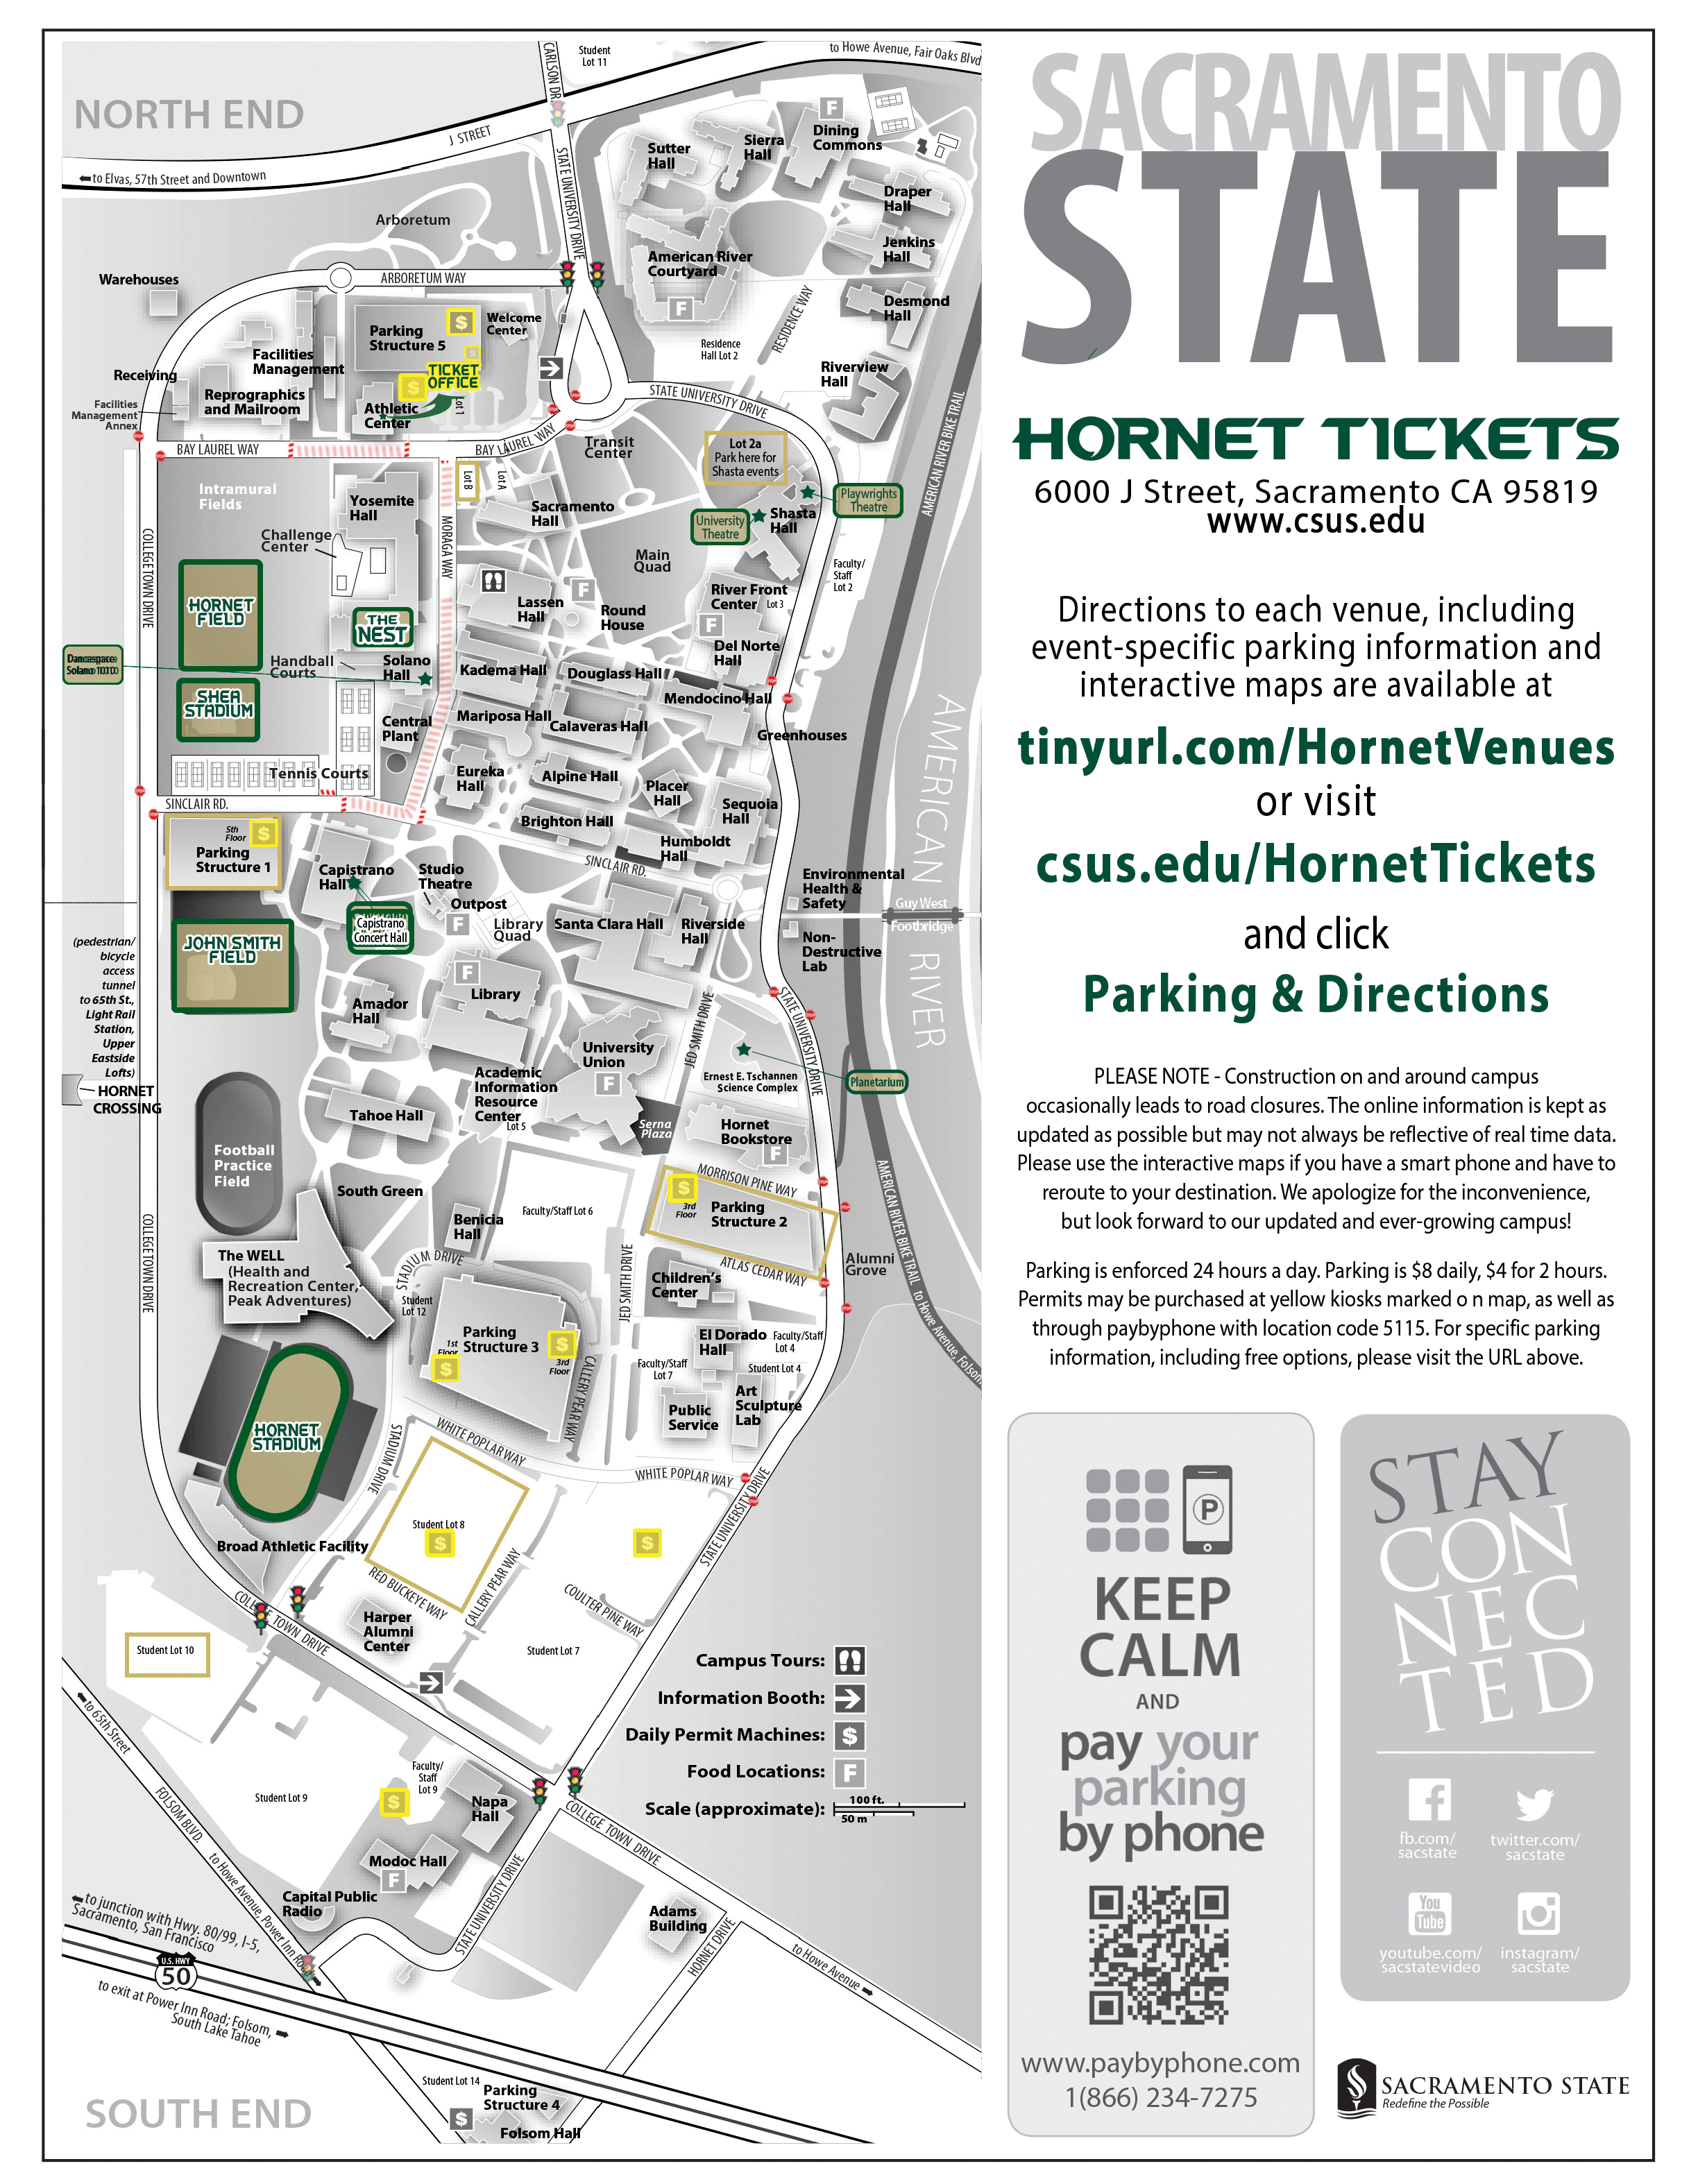 Opening Day parking and directions